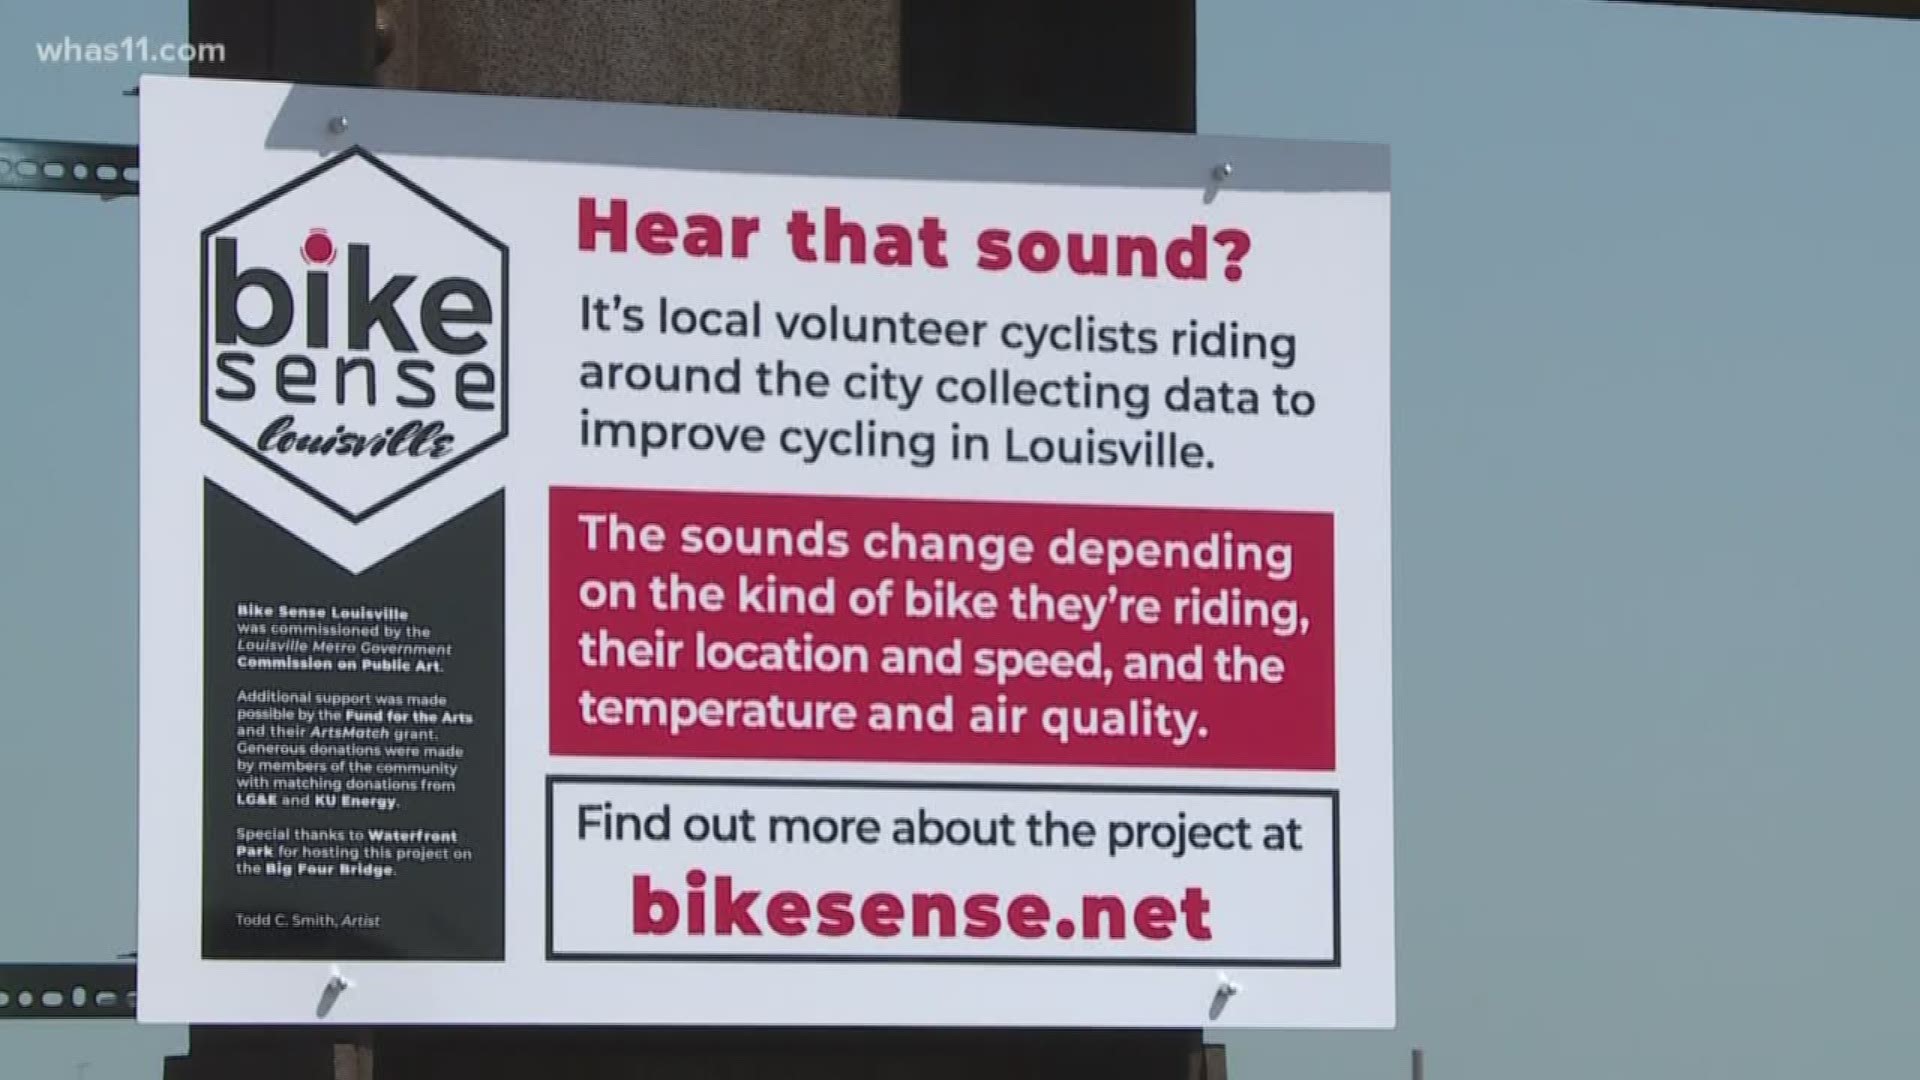 Louisville Metro is tracking cyclists while also creating an artistic way to get the community involved.